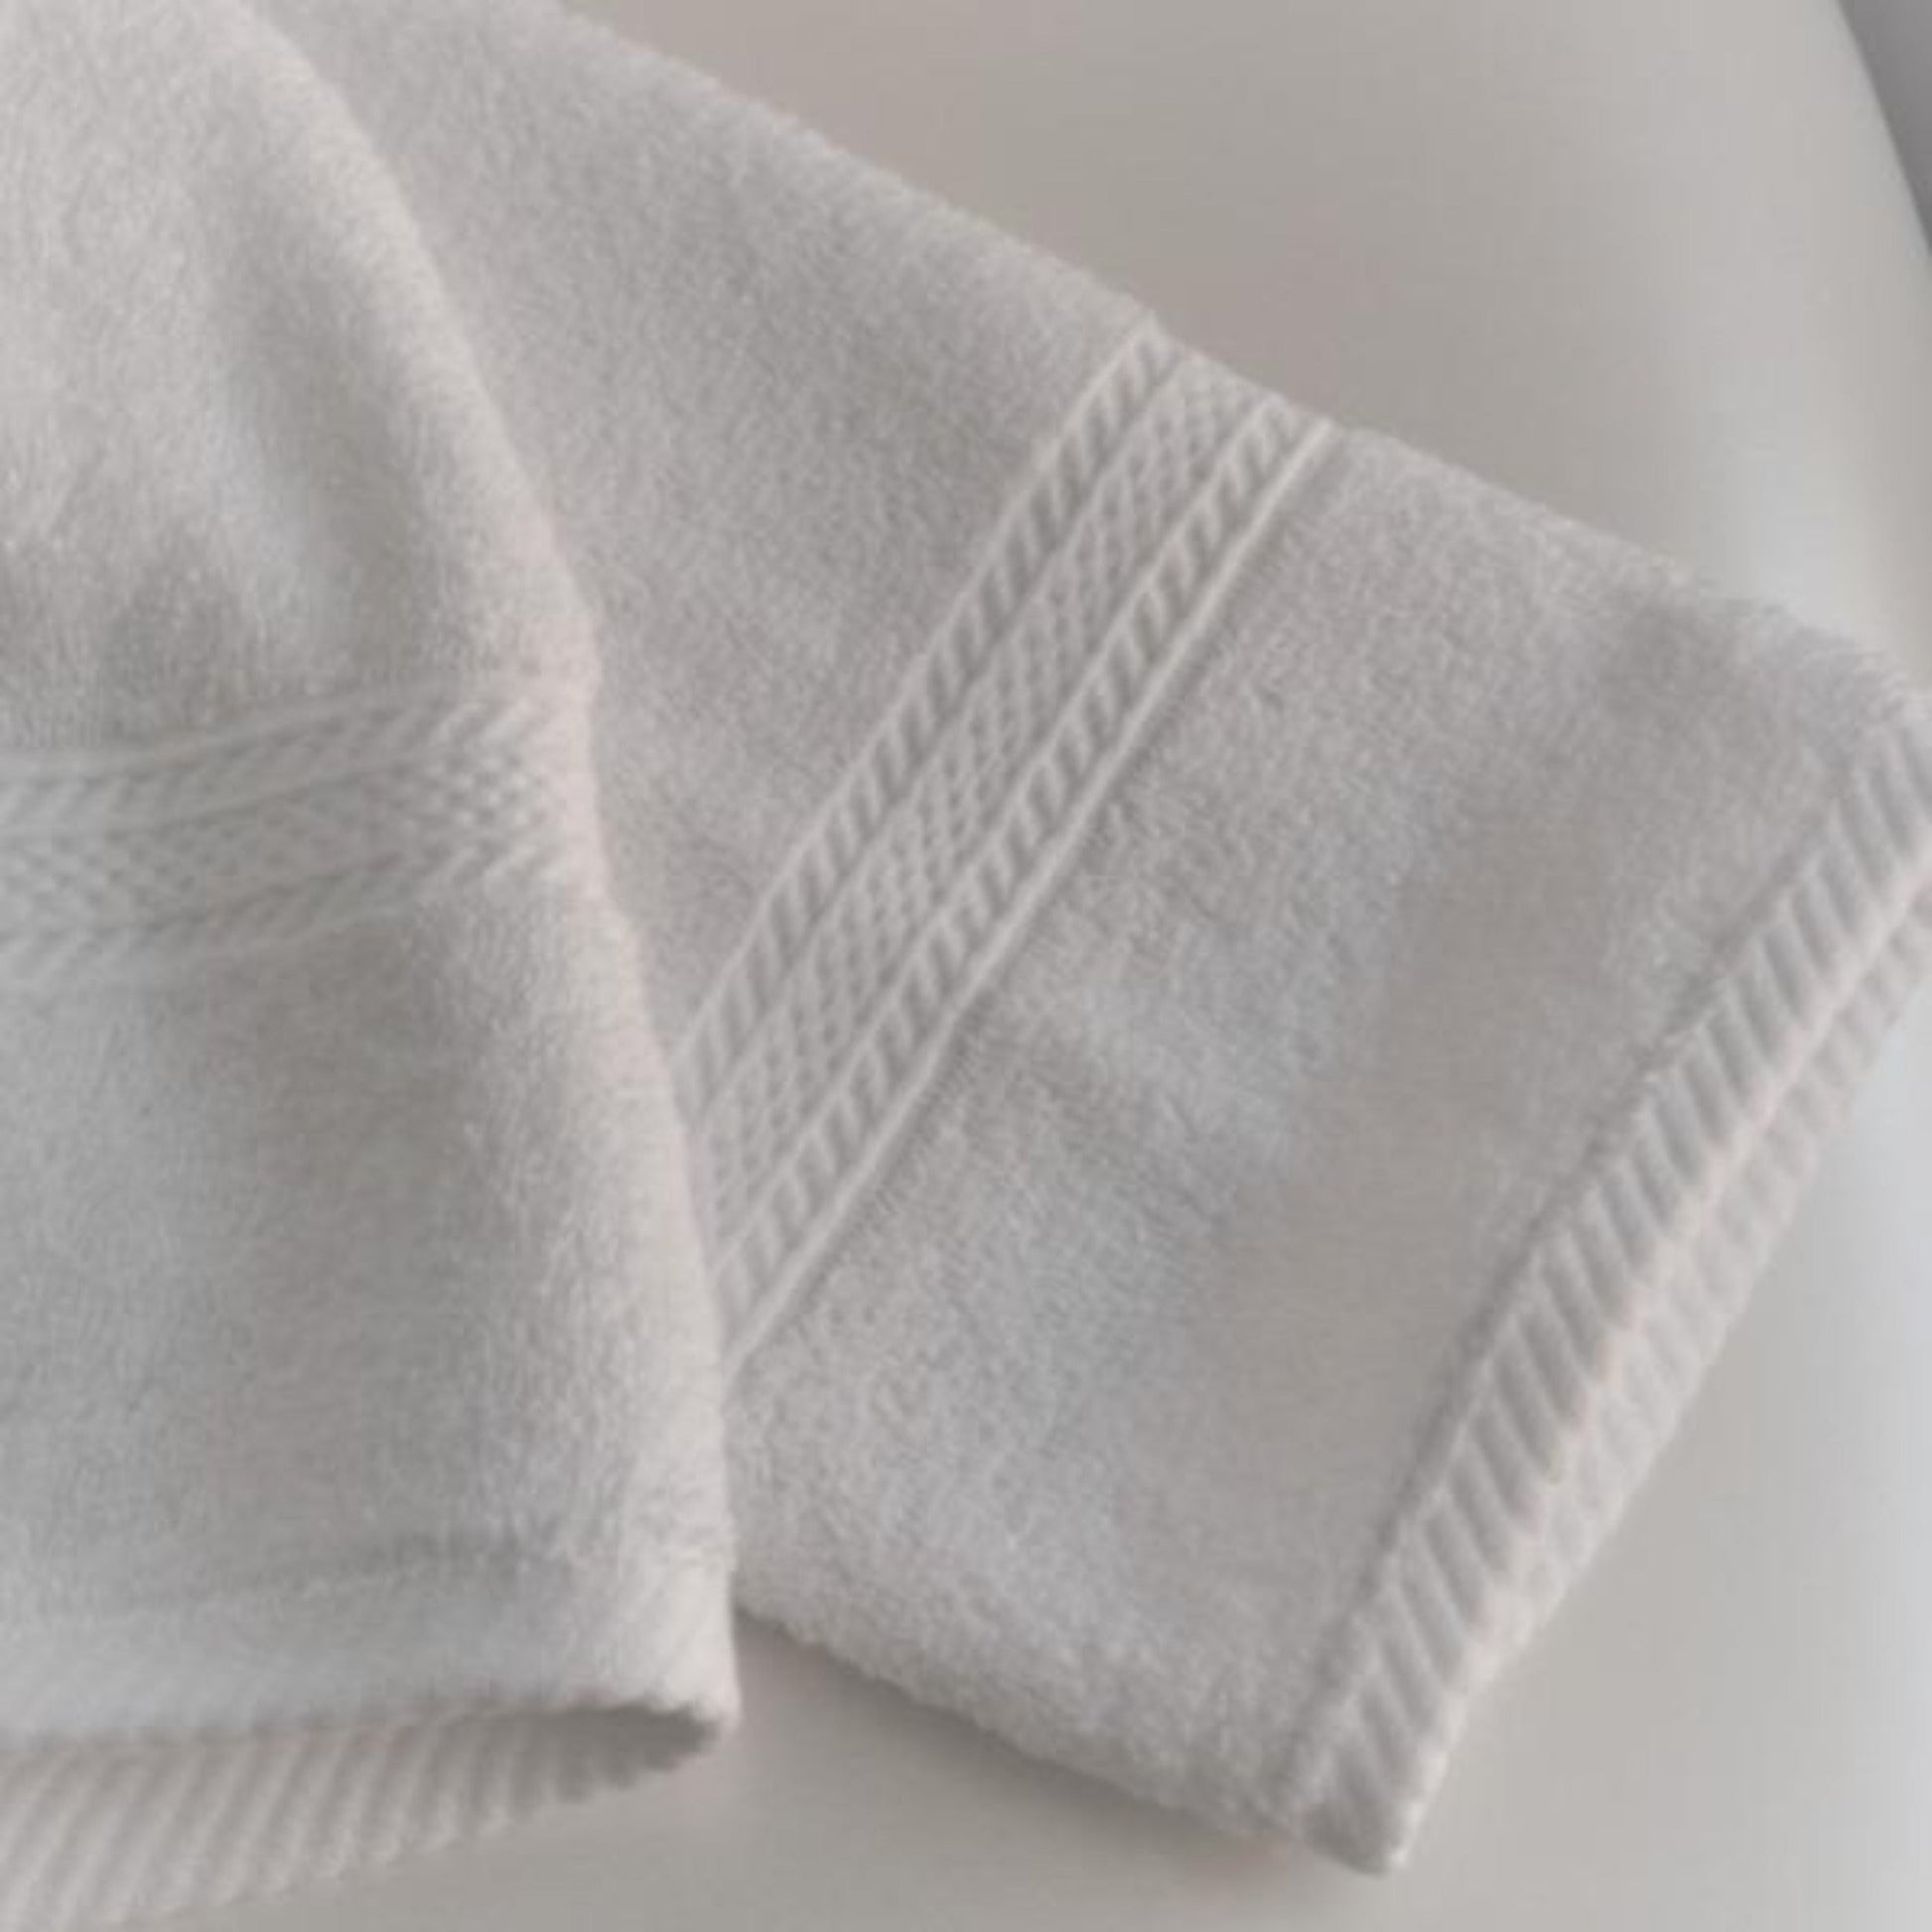 Lasting Impression: Luxury Hotel Towels - Shop now at CHS